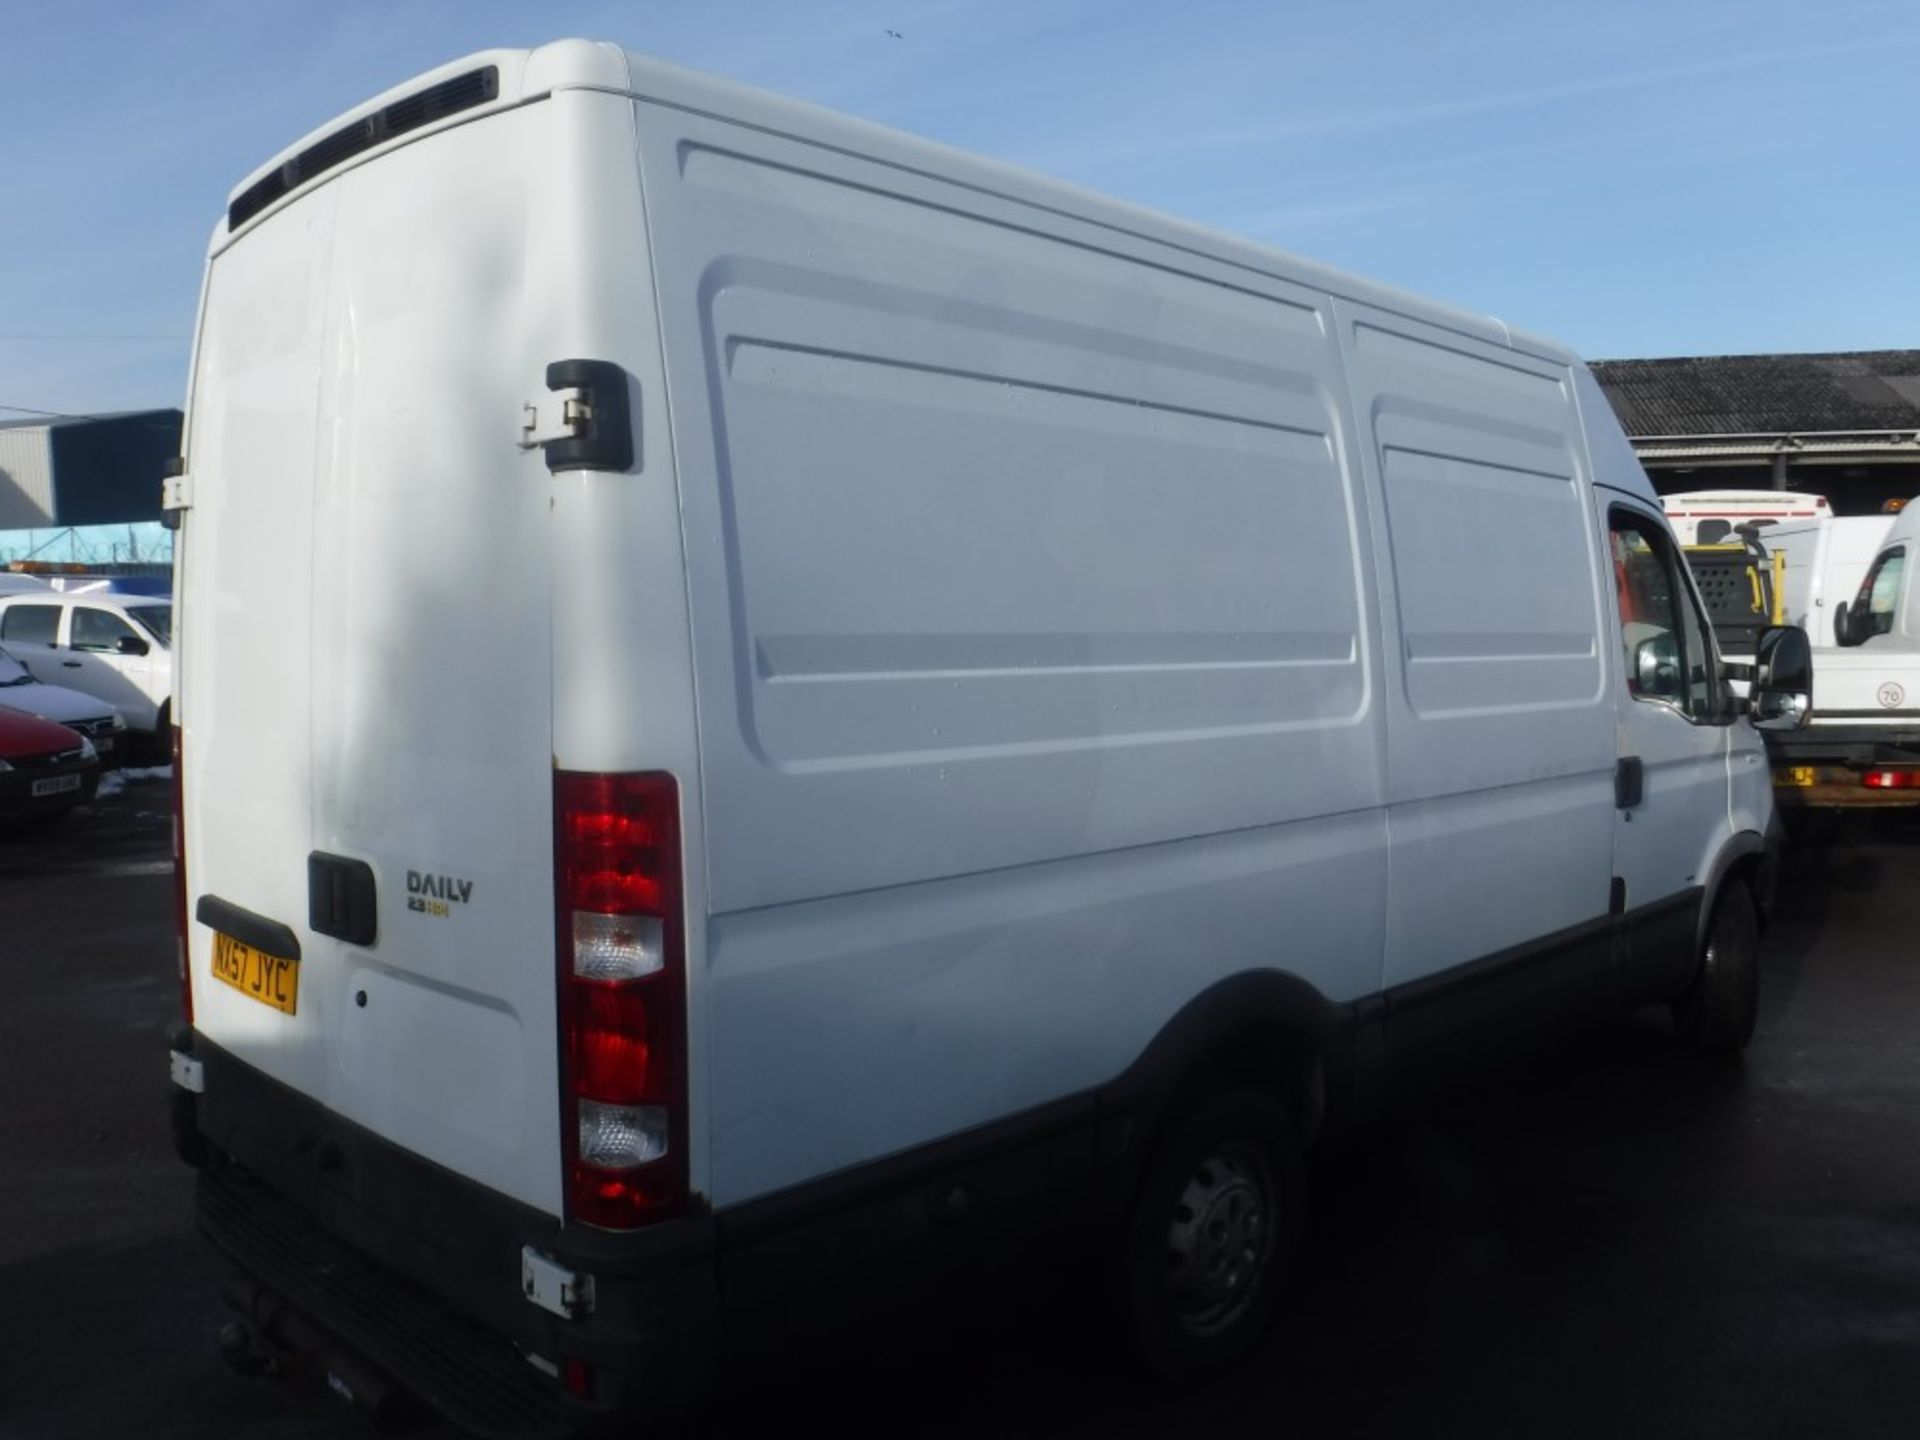 57 reg IVECO DAILY 35S12 MWB, 1ST REG 01/08, TEST 07/19, 91345M NOT WARRANTED, V5 HERE, 2 FORMER - Image 4 of 6